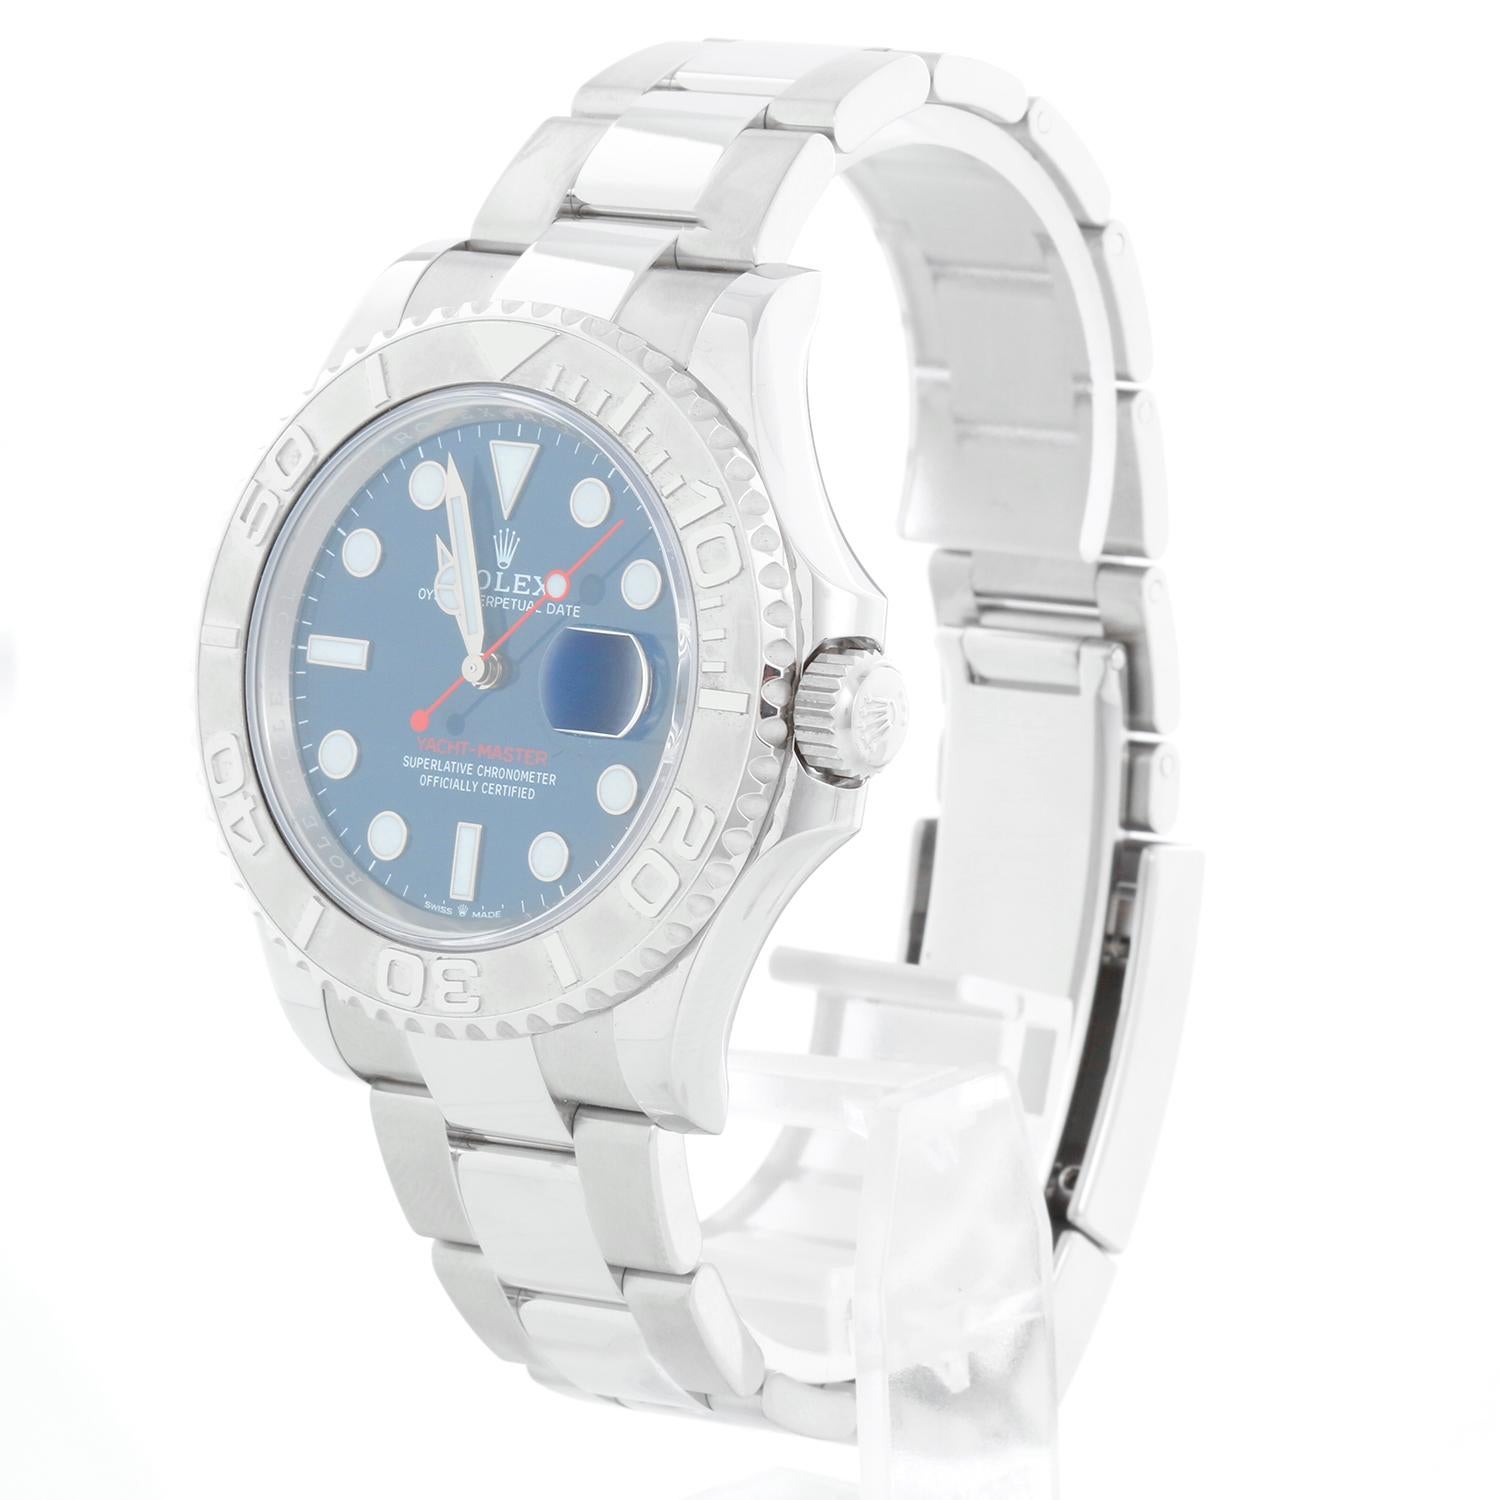 Rolex Yacht-Master Men's Stainless Steel Watch 126622 - Automatic winding, Caliber 3235 movement, Quickset, sapphire crystal. Stainless steel case with platinum bezel  (40mm diameter). Blue dial with luminous markers. Stainless steel Oyster bracelet